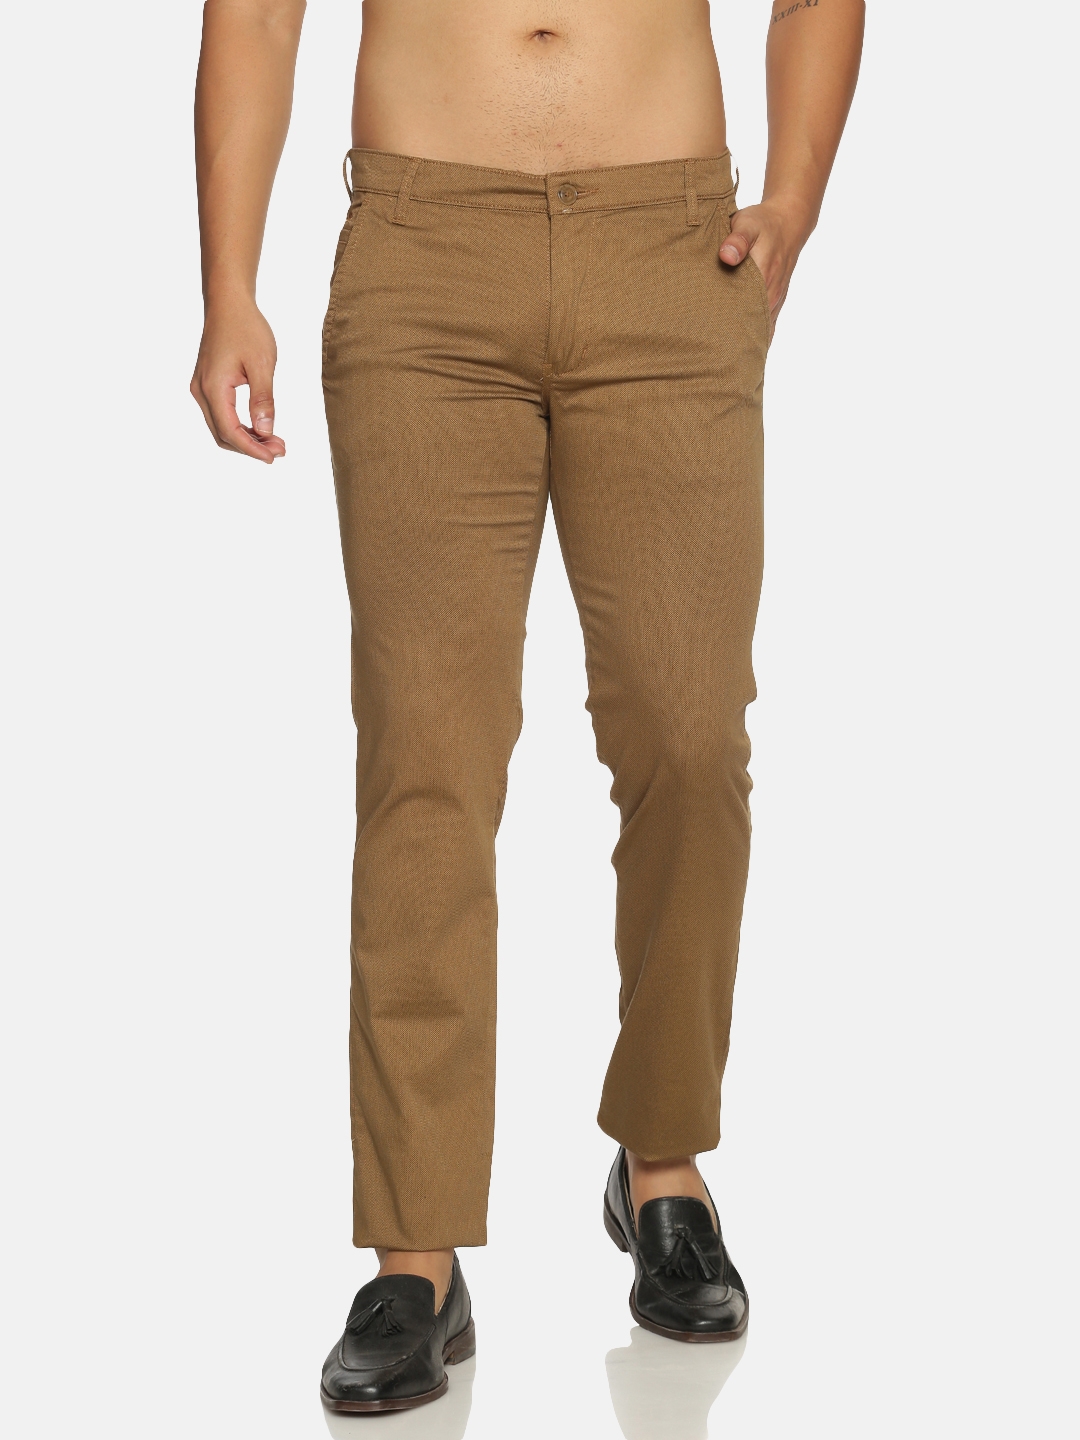 Chennis | Chennis Men's Casual Brown Trousers